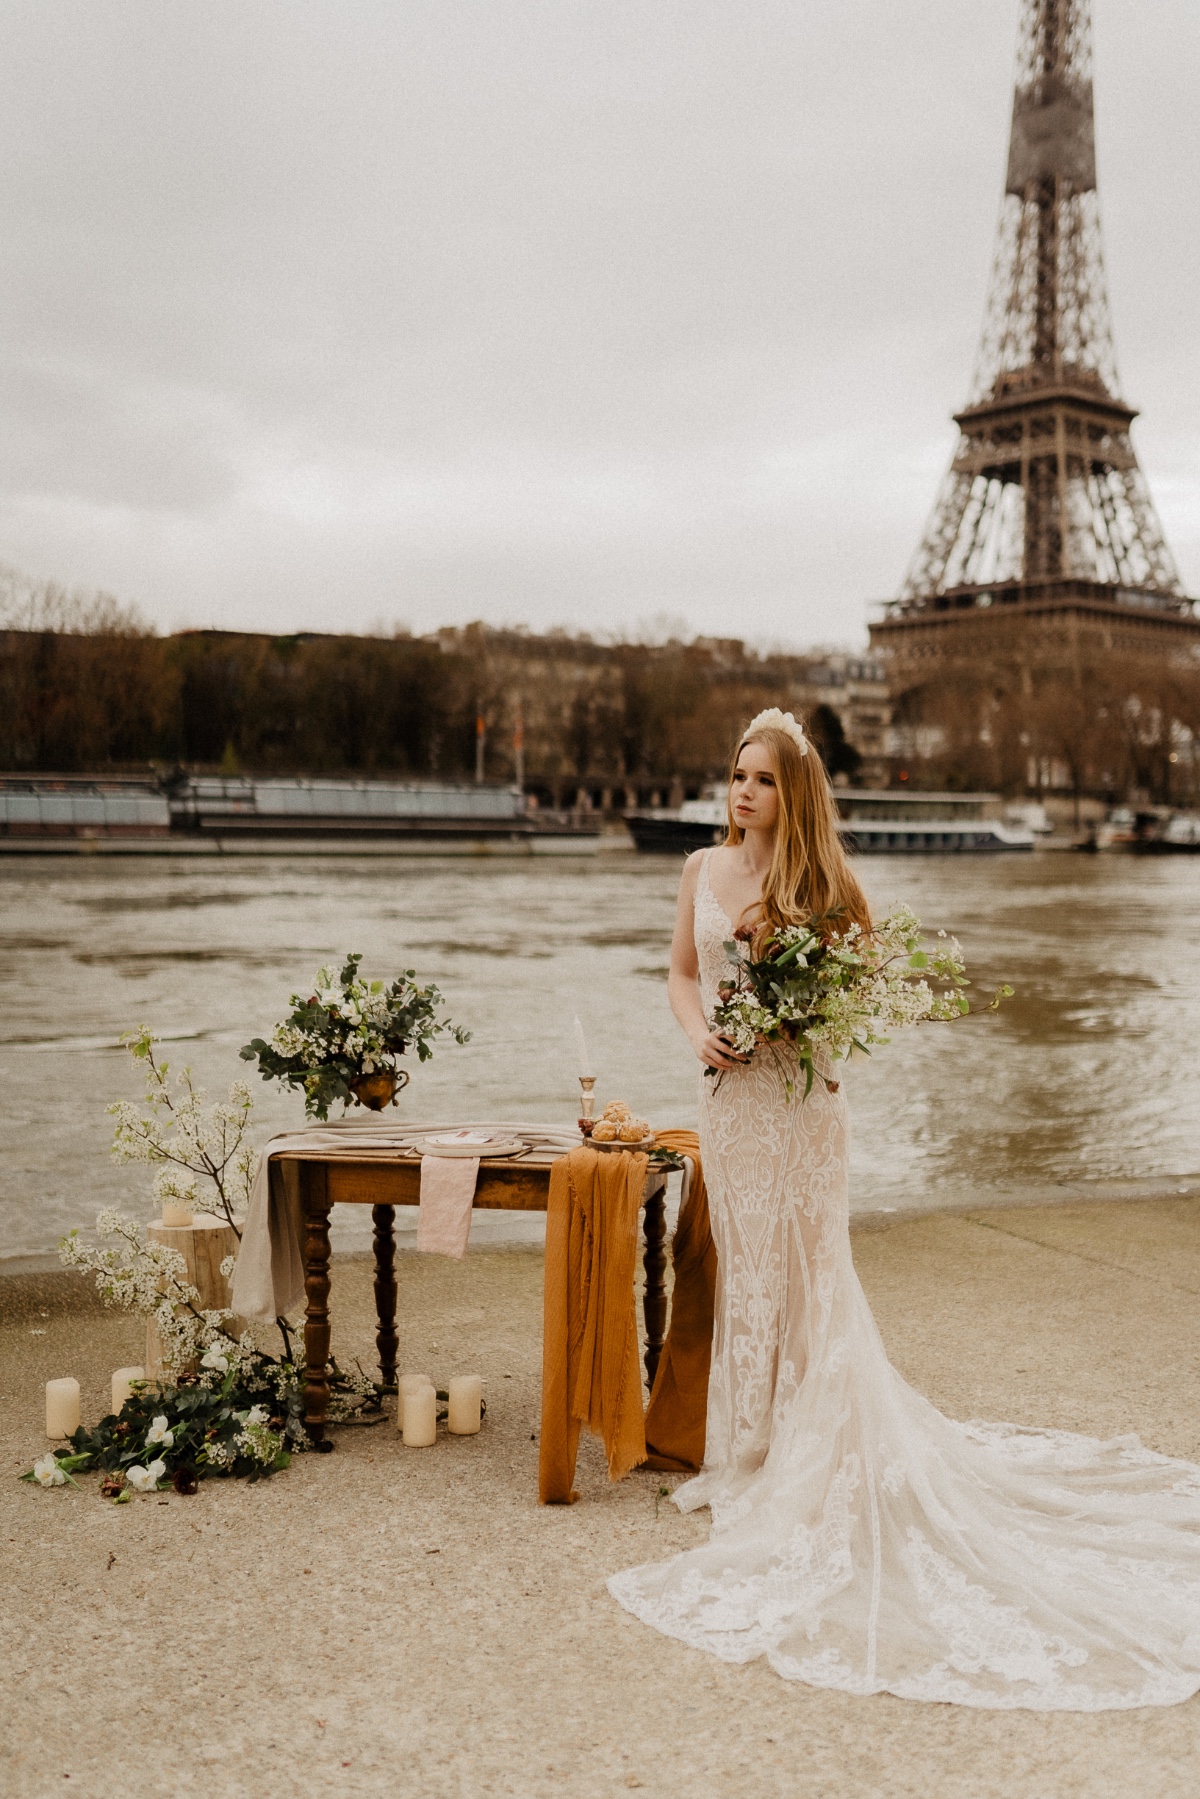 French elopement in front of the Seine River